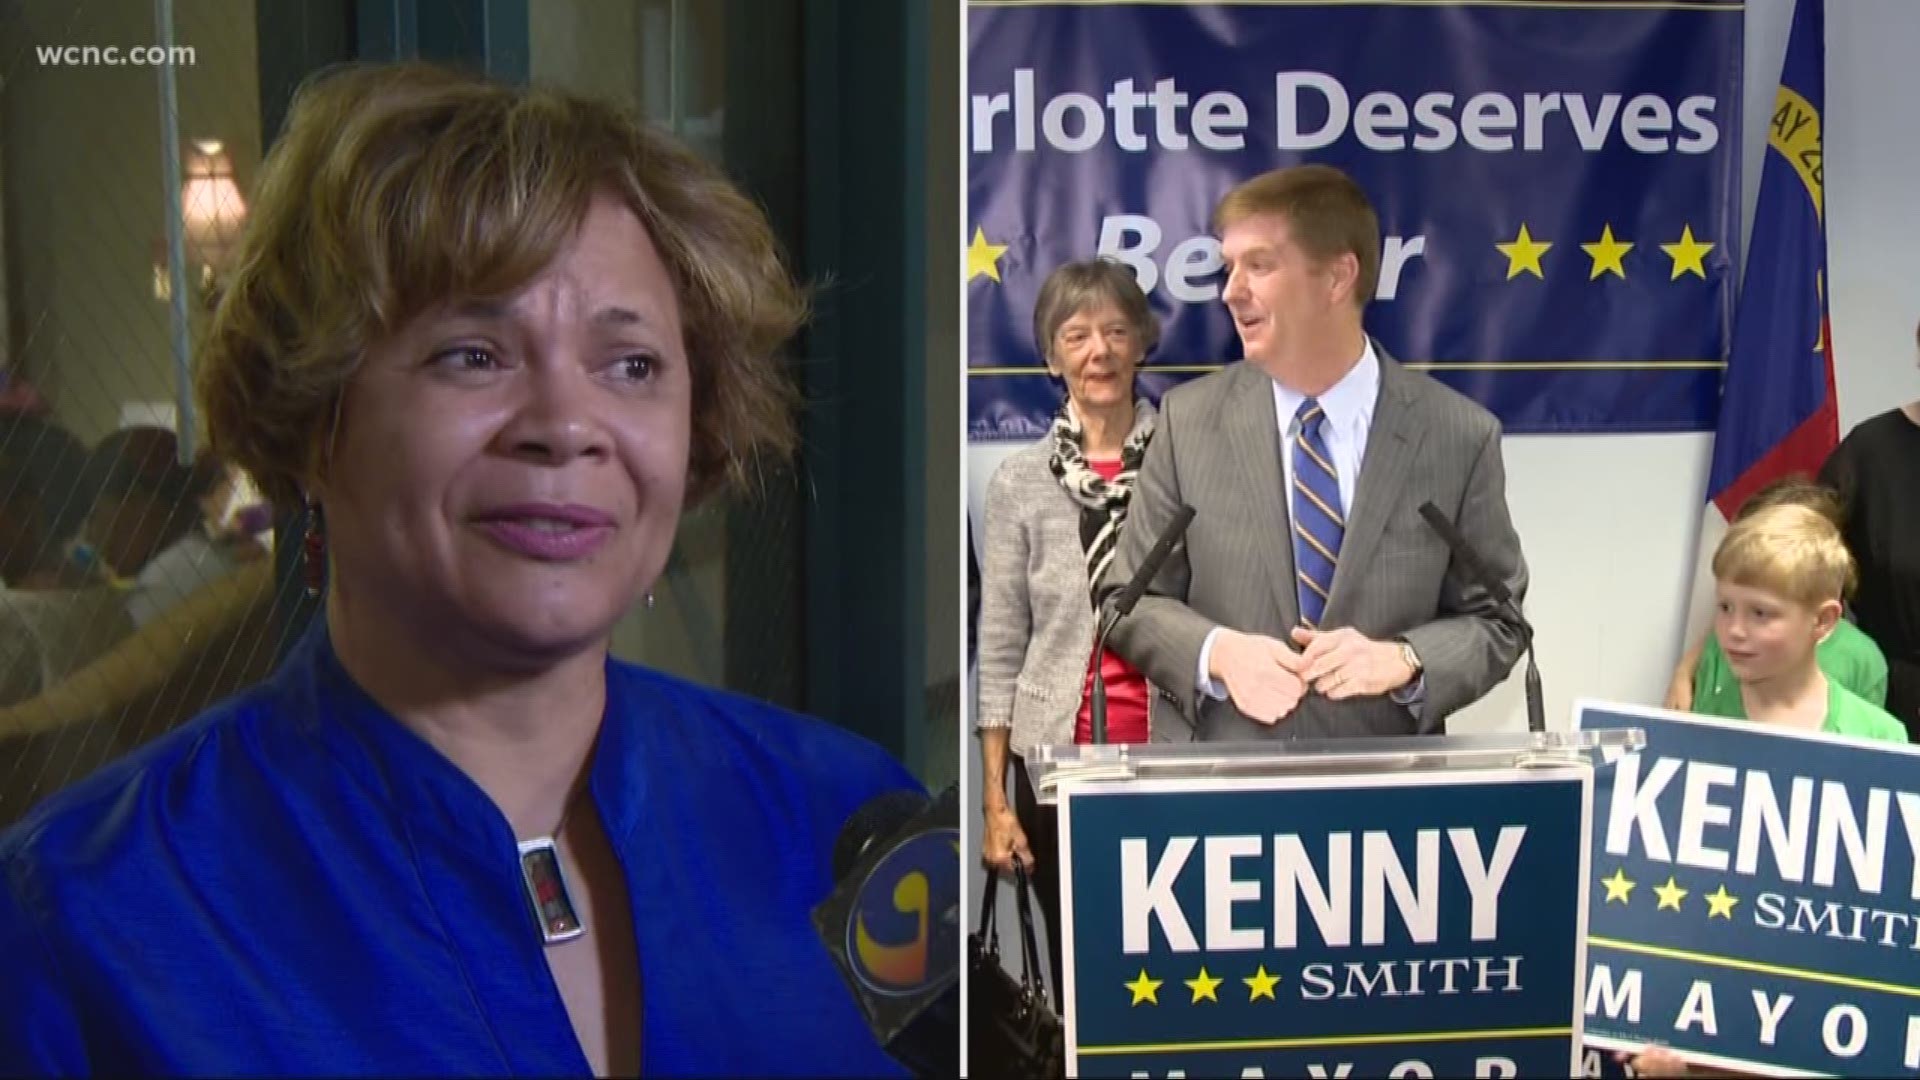 The coalition endorsed Kenny Smith for mayor